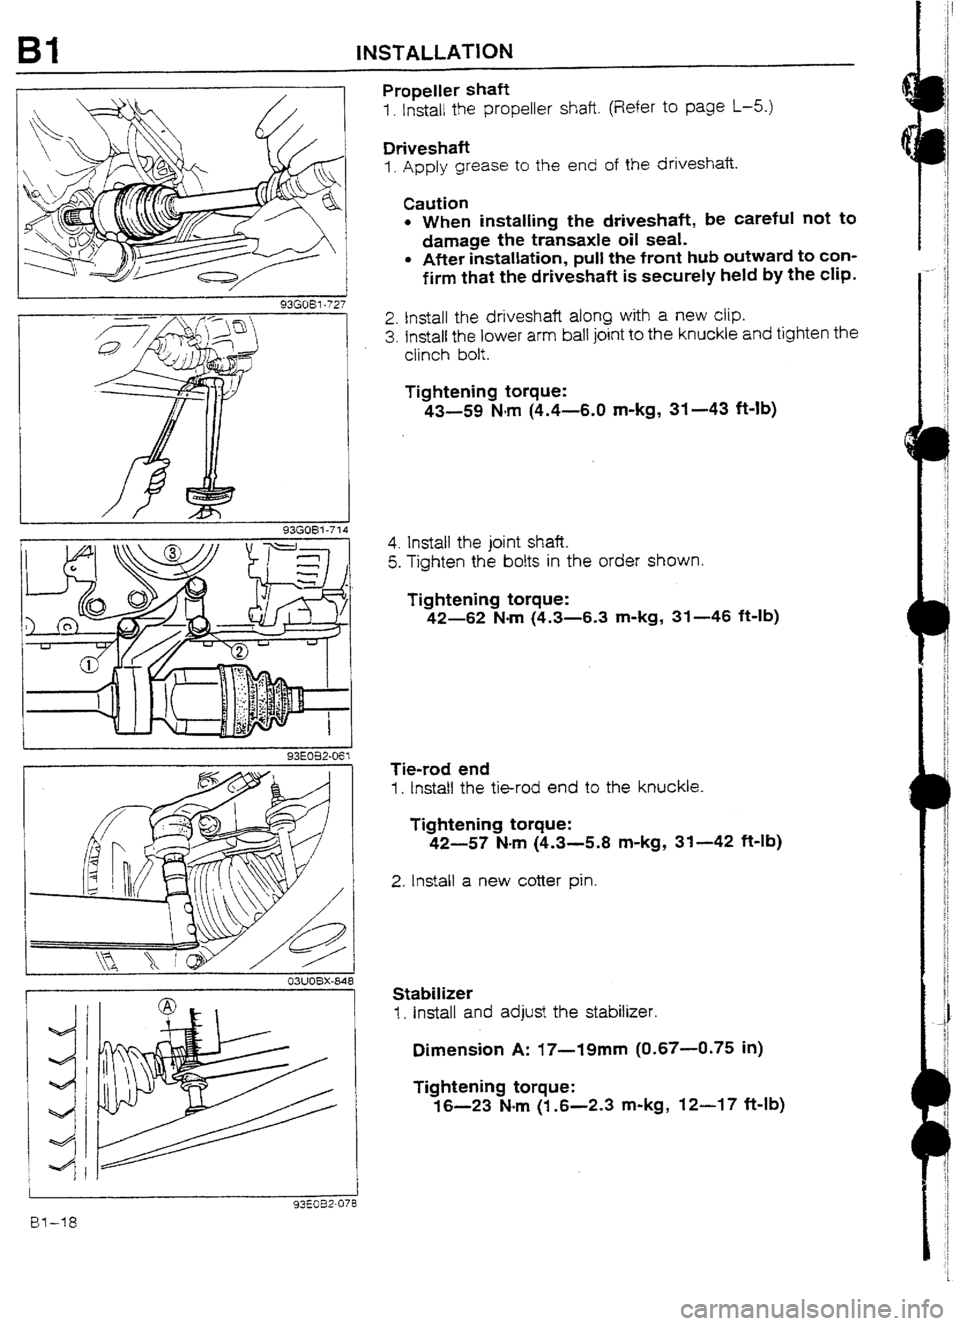 MAZDA 232 1990  Workshop Manual Suplement 81 INSTALLATION 
93GOBl-714 
I 93E082-061 
i 03UOBX-848 
Propeller shaft 
1. Install the propeller shaft. (Refer to page l-5.) 
Driveshaft 
I. Apply grease to the end of the driveshafi. 
Caution 
l Wh